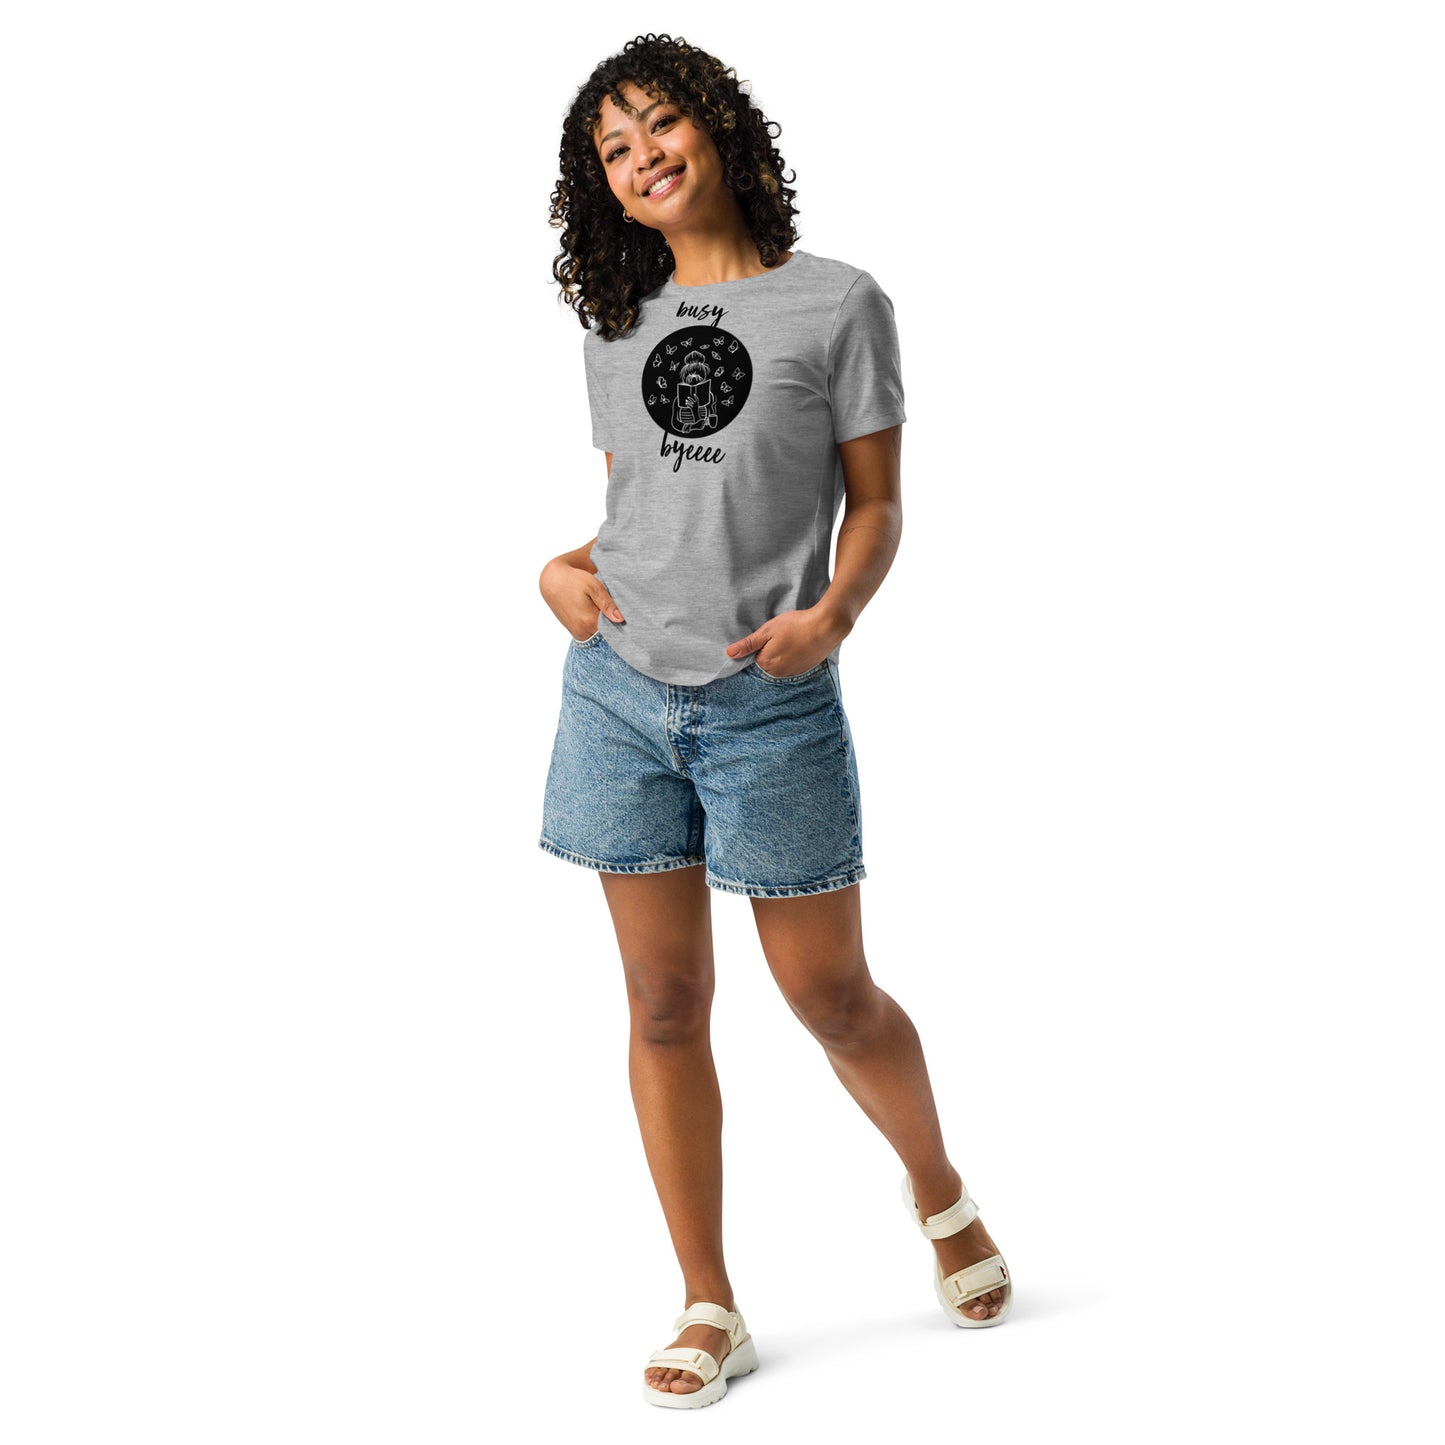 Women's Relaxed T-Shirt- Busy Byeeee